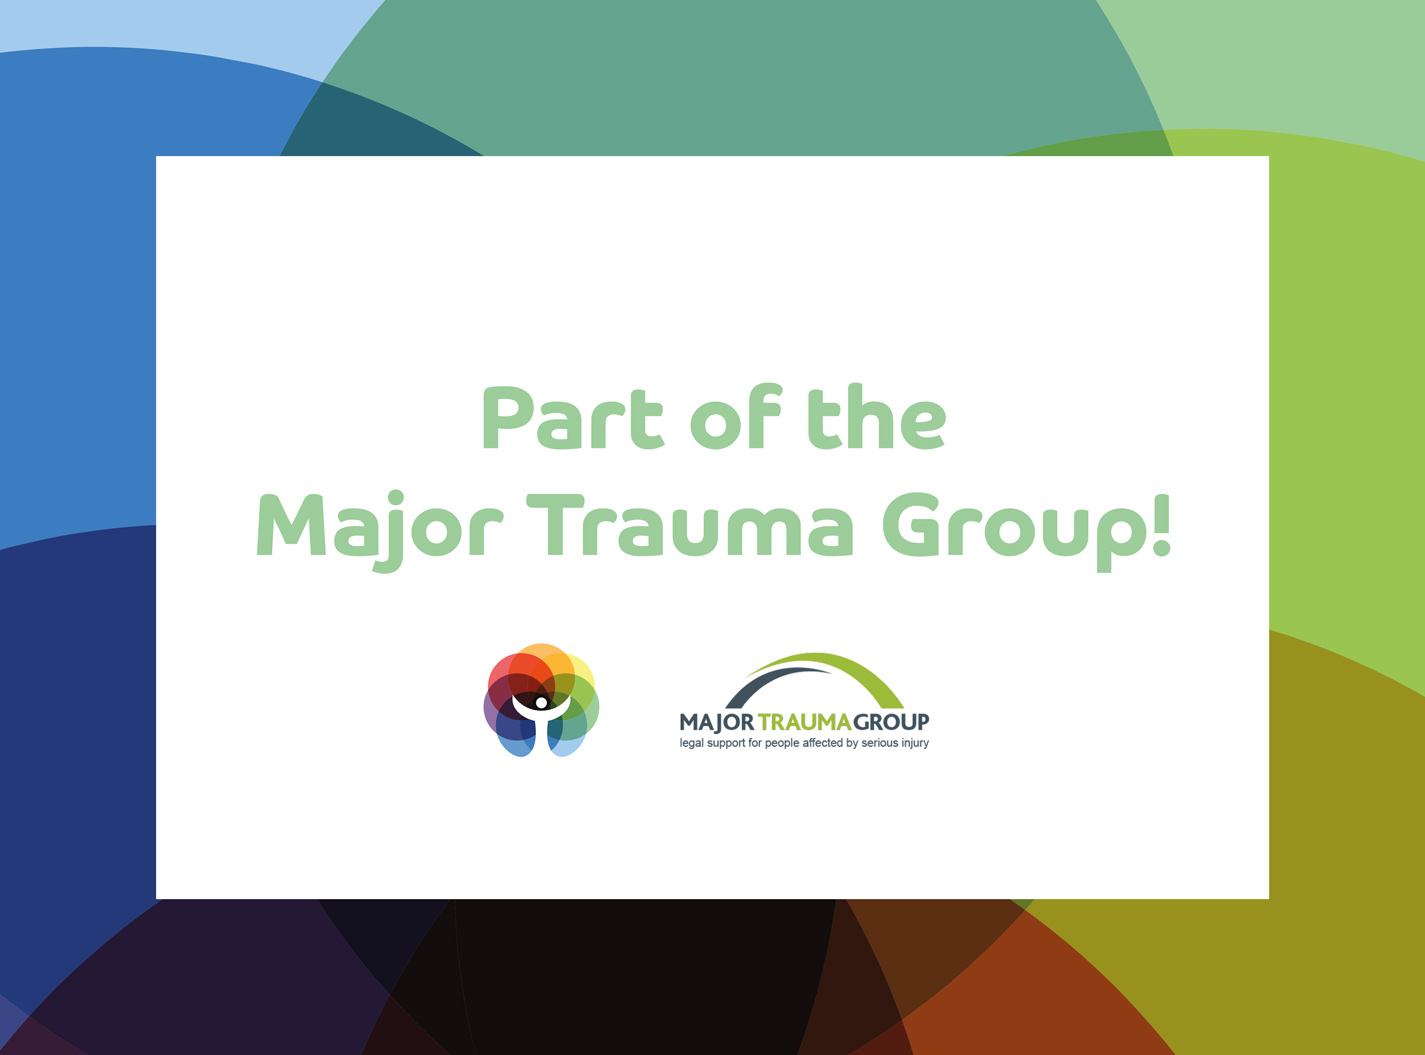 Mind Right are proud to be added to the Major Trauma Group